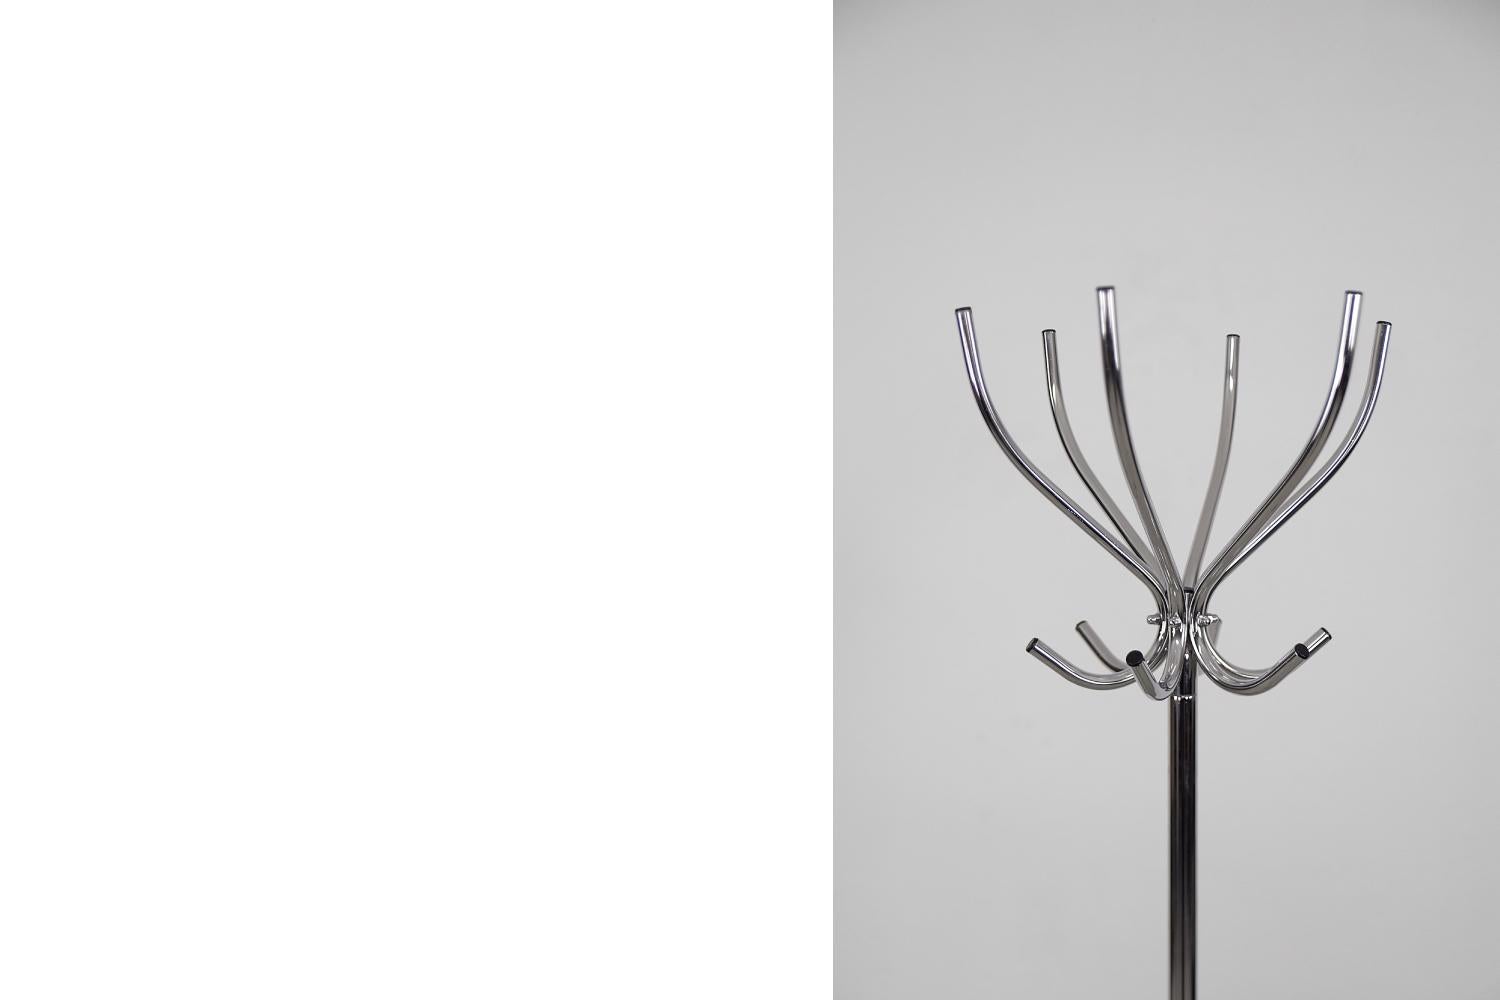 This chrome-plated floor rack was manufactured by the Swedish company Rörmekano and Skånes Fagerhult AB during the 1980s. It is Piccolo model. This piece is made of chrome steel. It has a crown with 12 hangers for clothes and is mounted on four